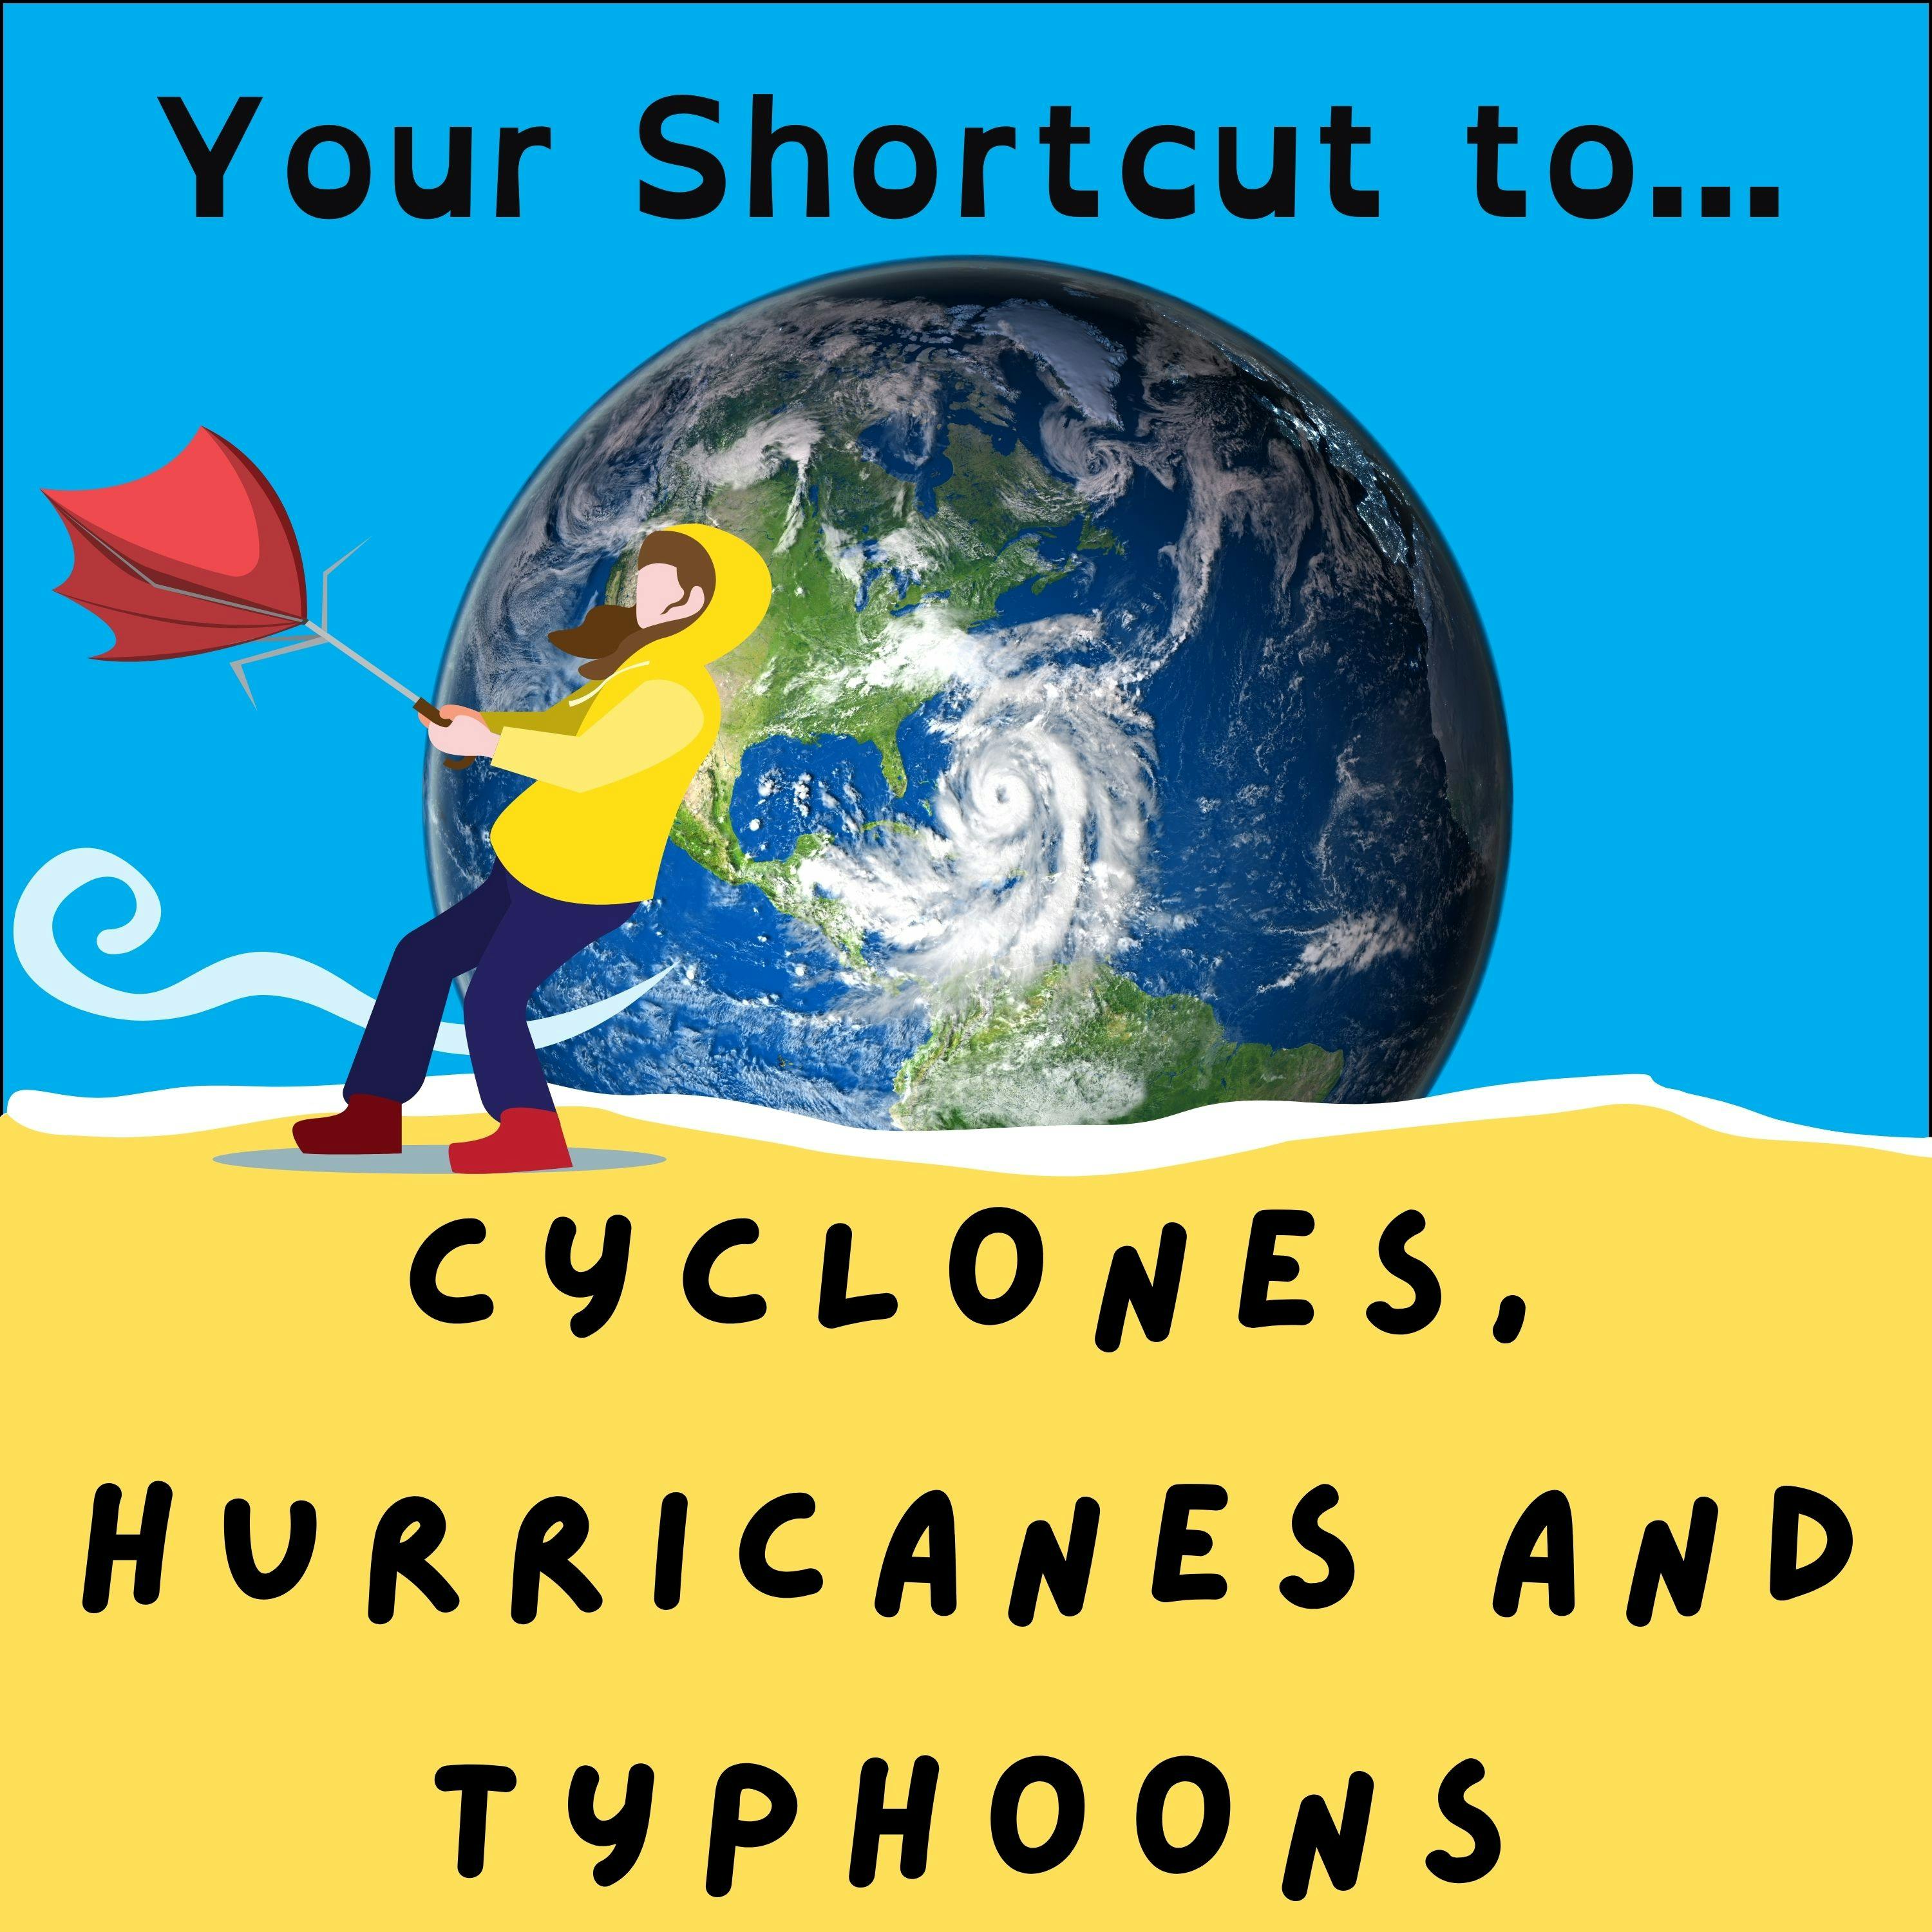 Your Shortcut to... Cyclones, Hurricanes and Typhoons